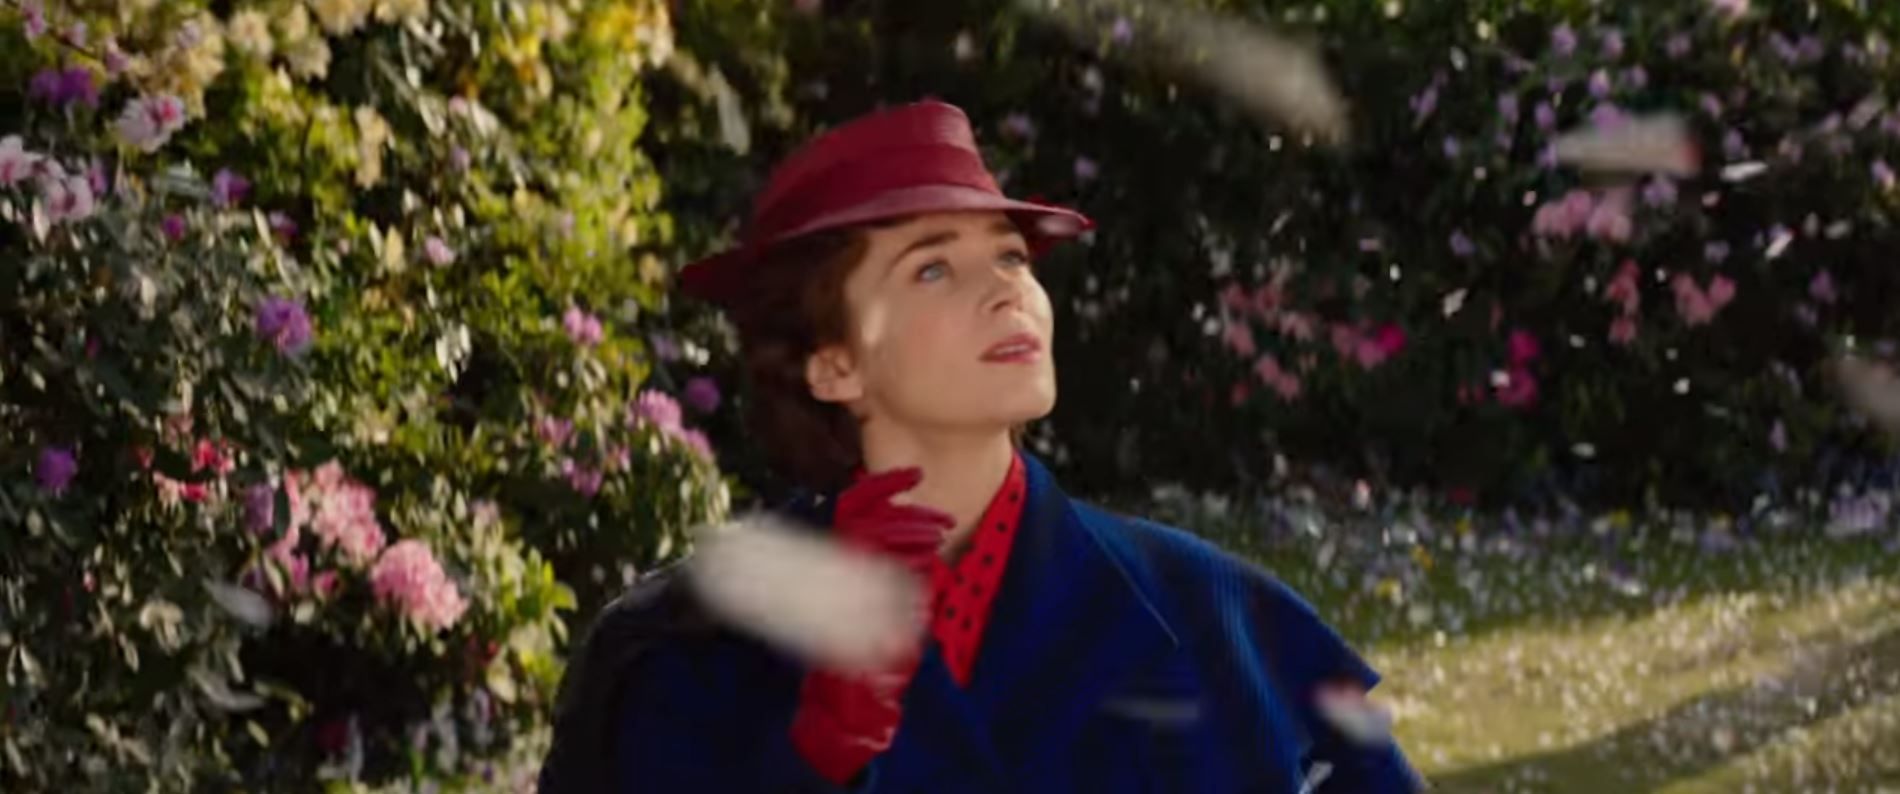 The First Full-Length Trailer For The 'Mary Poppins' Sequel Is Here And It's Magical